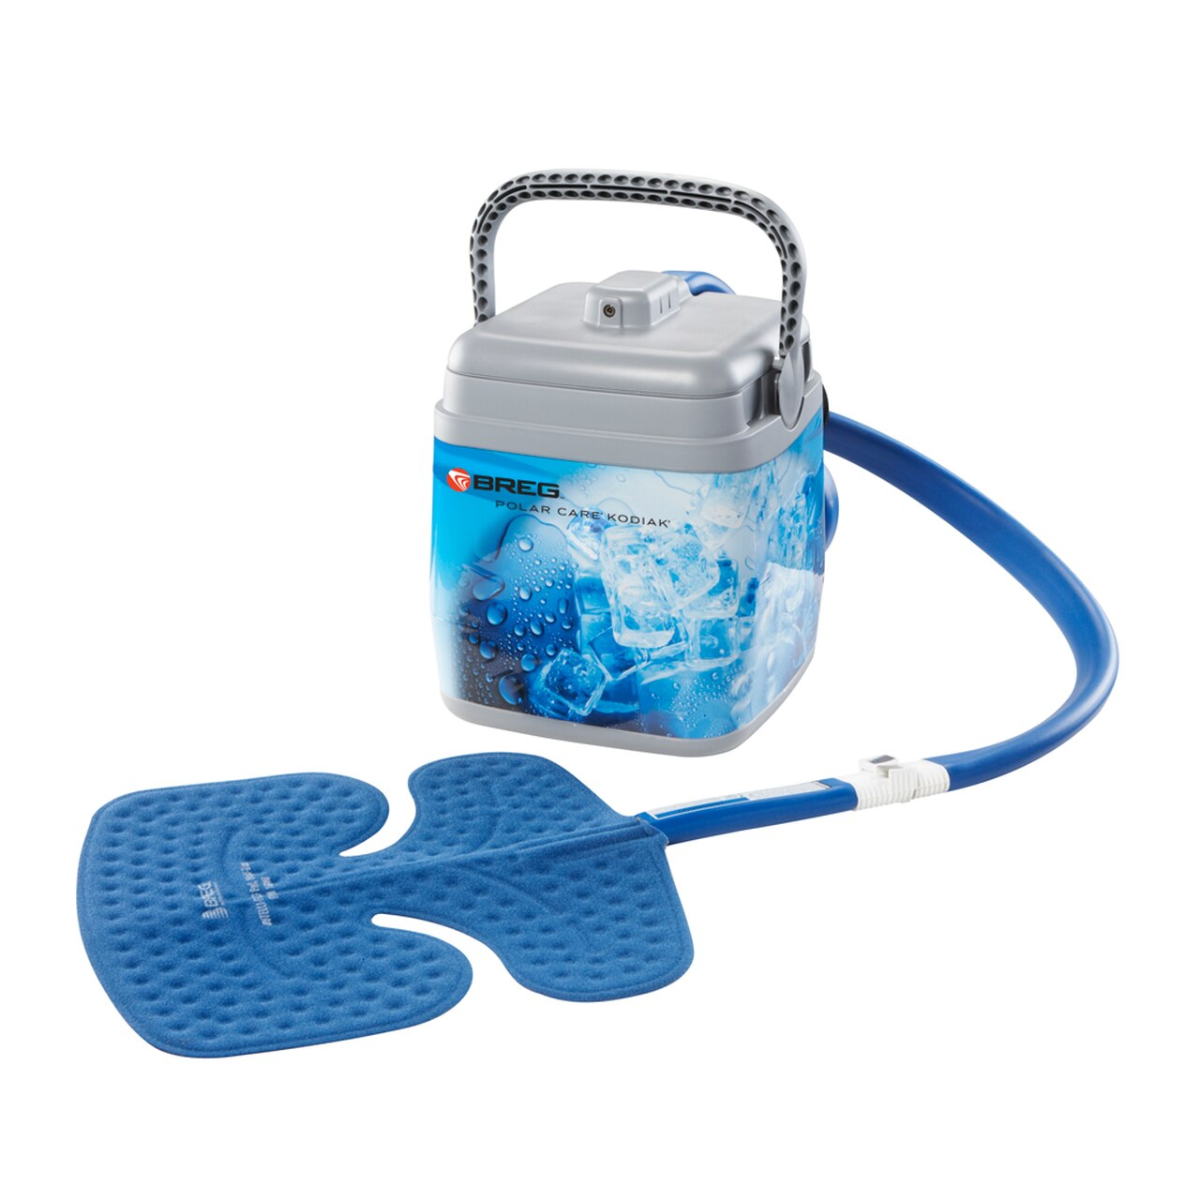 Rent ICE MACHINE - Cold Therapy for Your Knee Breg Polar Care Kodiak